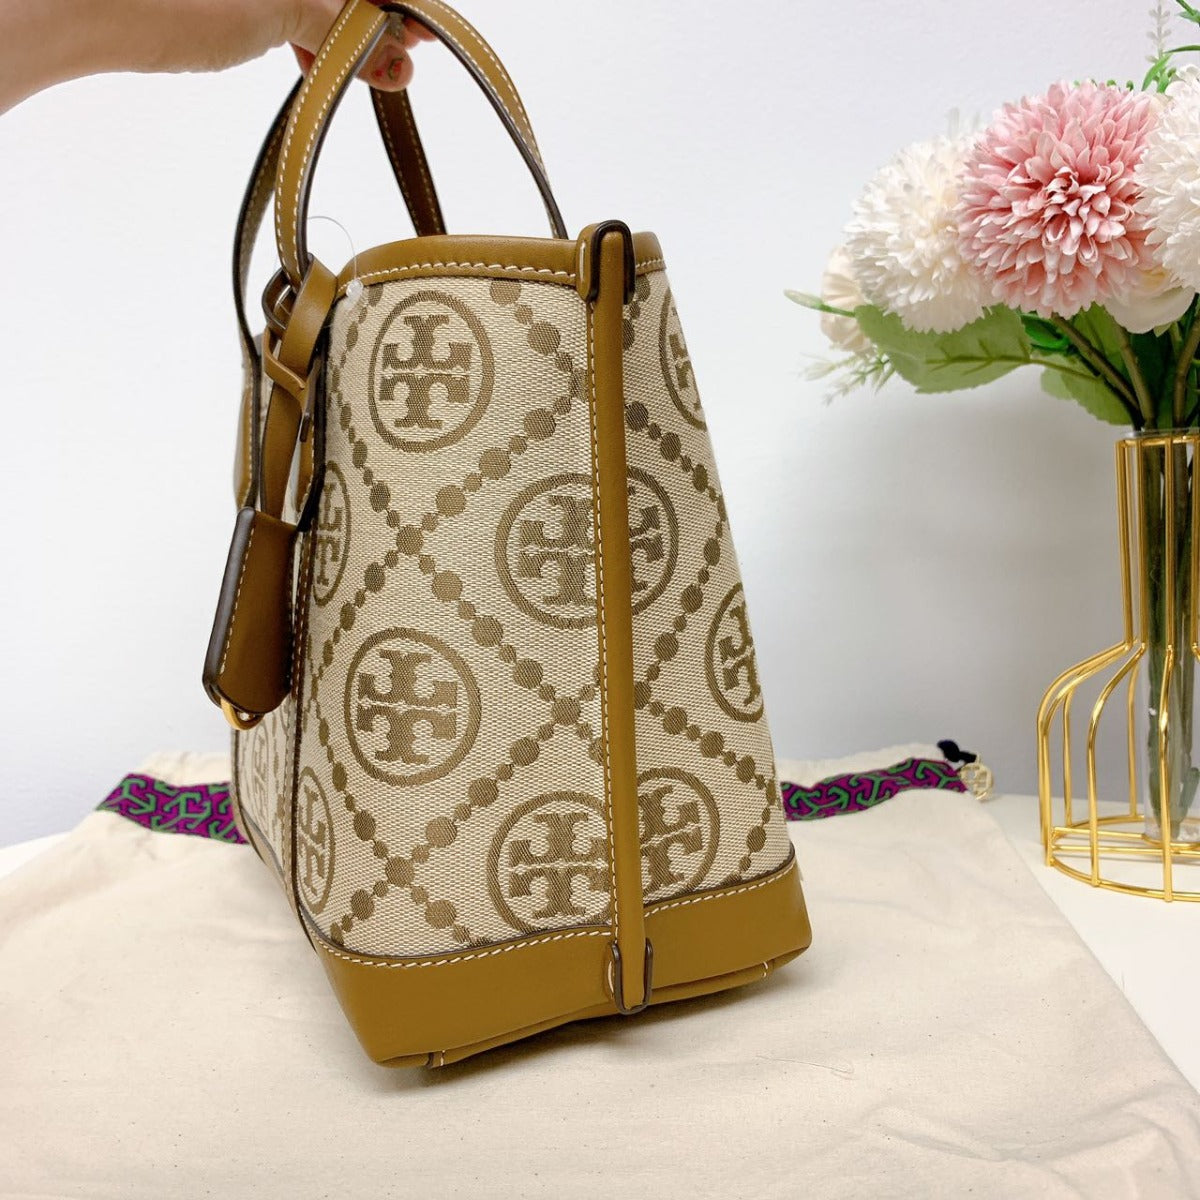 Tory Burch 83313 PERRY T MONOGRAM SMALL TRIPLE-COMPARTMENT TOTE IN HAZEL 371